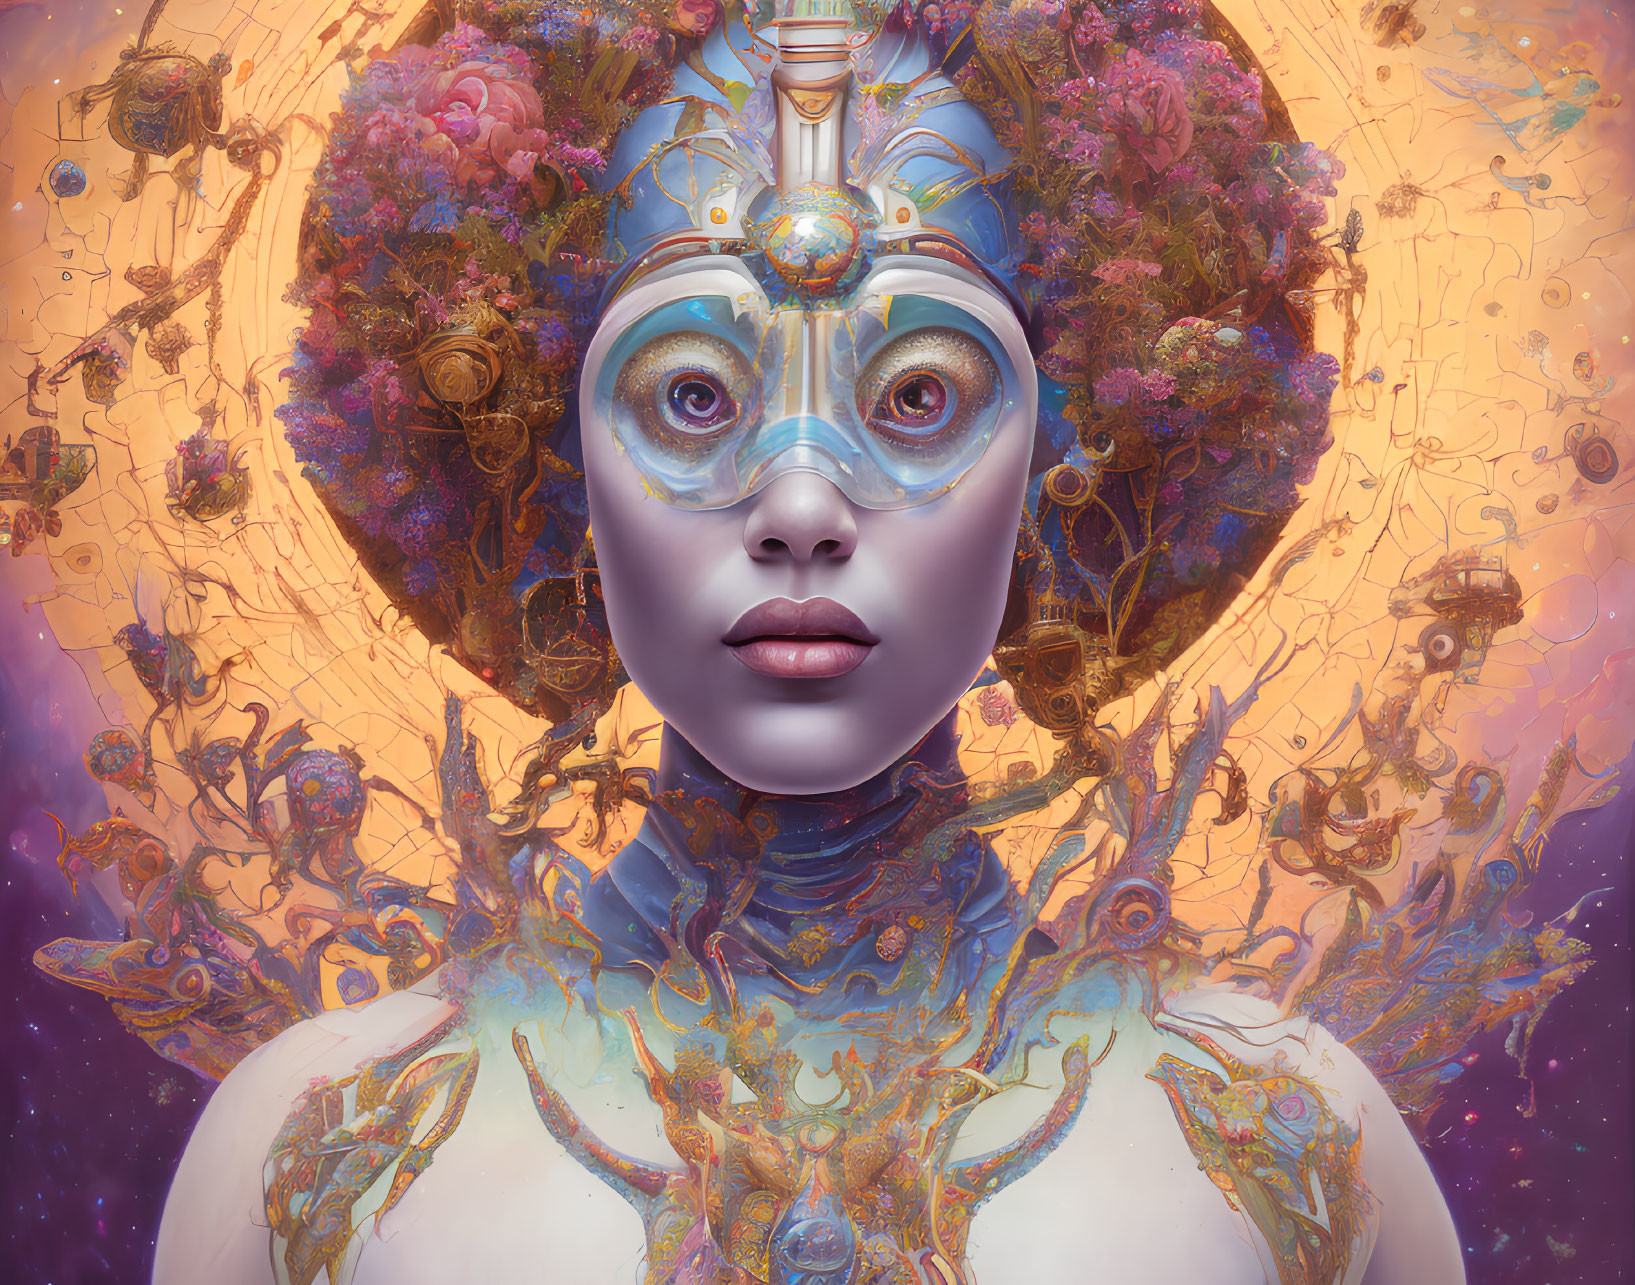 Surreal portrait of female android with ornate headgear and floating orbs